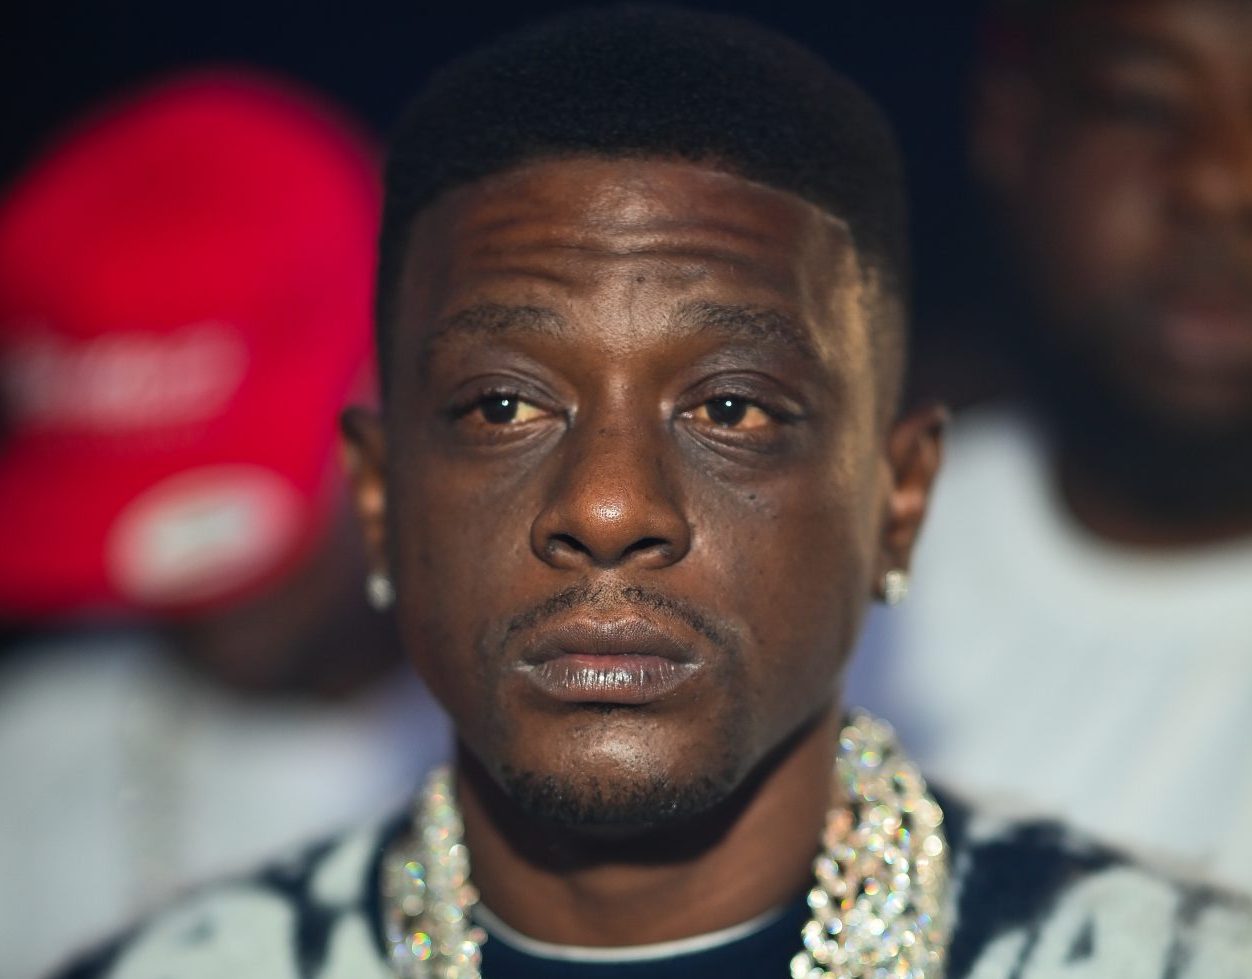 Boosie Says He Bought Breasts For His Ex But 'Made' Her Remove Them